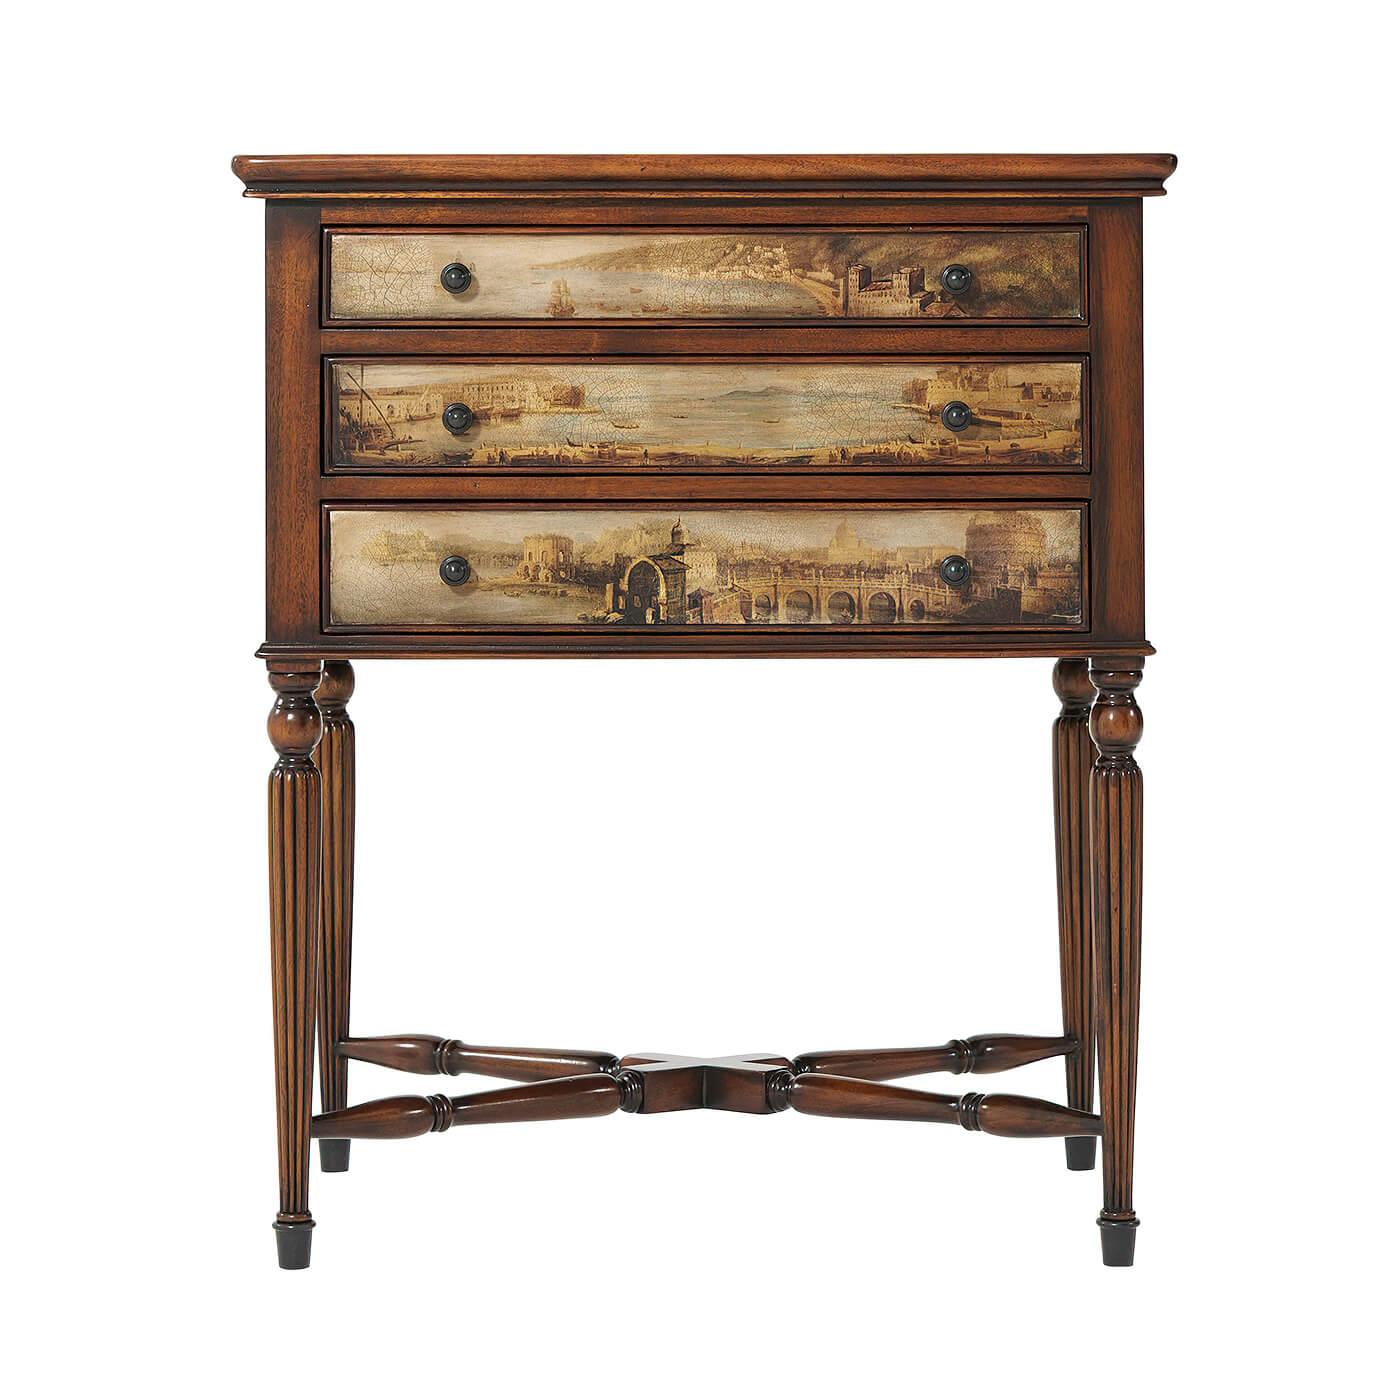 A Regency style side table or lamp table with classical landscape decoupage decoration, the rectangular dished tray top above three cockbeaded long drawers with brass handles, on turned and fluted tapering legs joined by turned stretchers